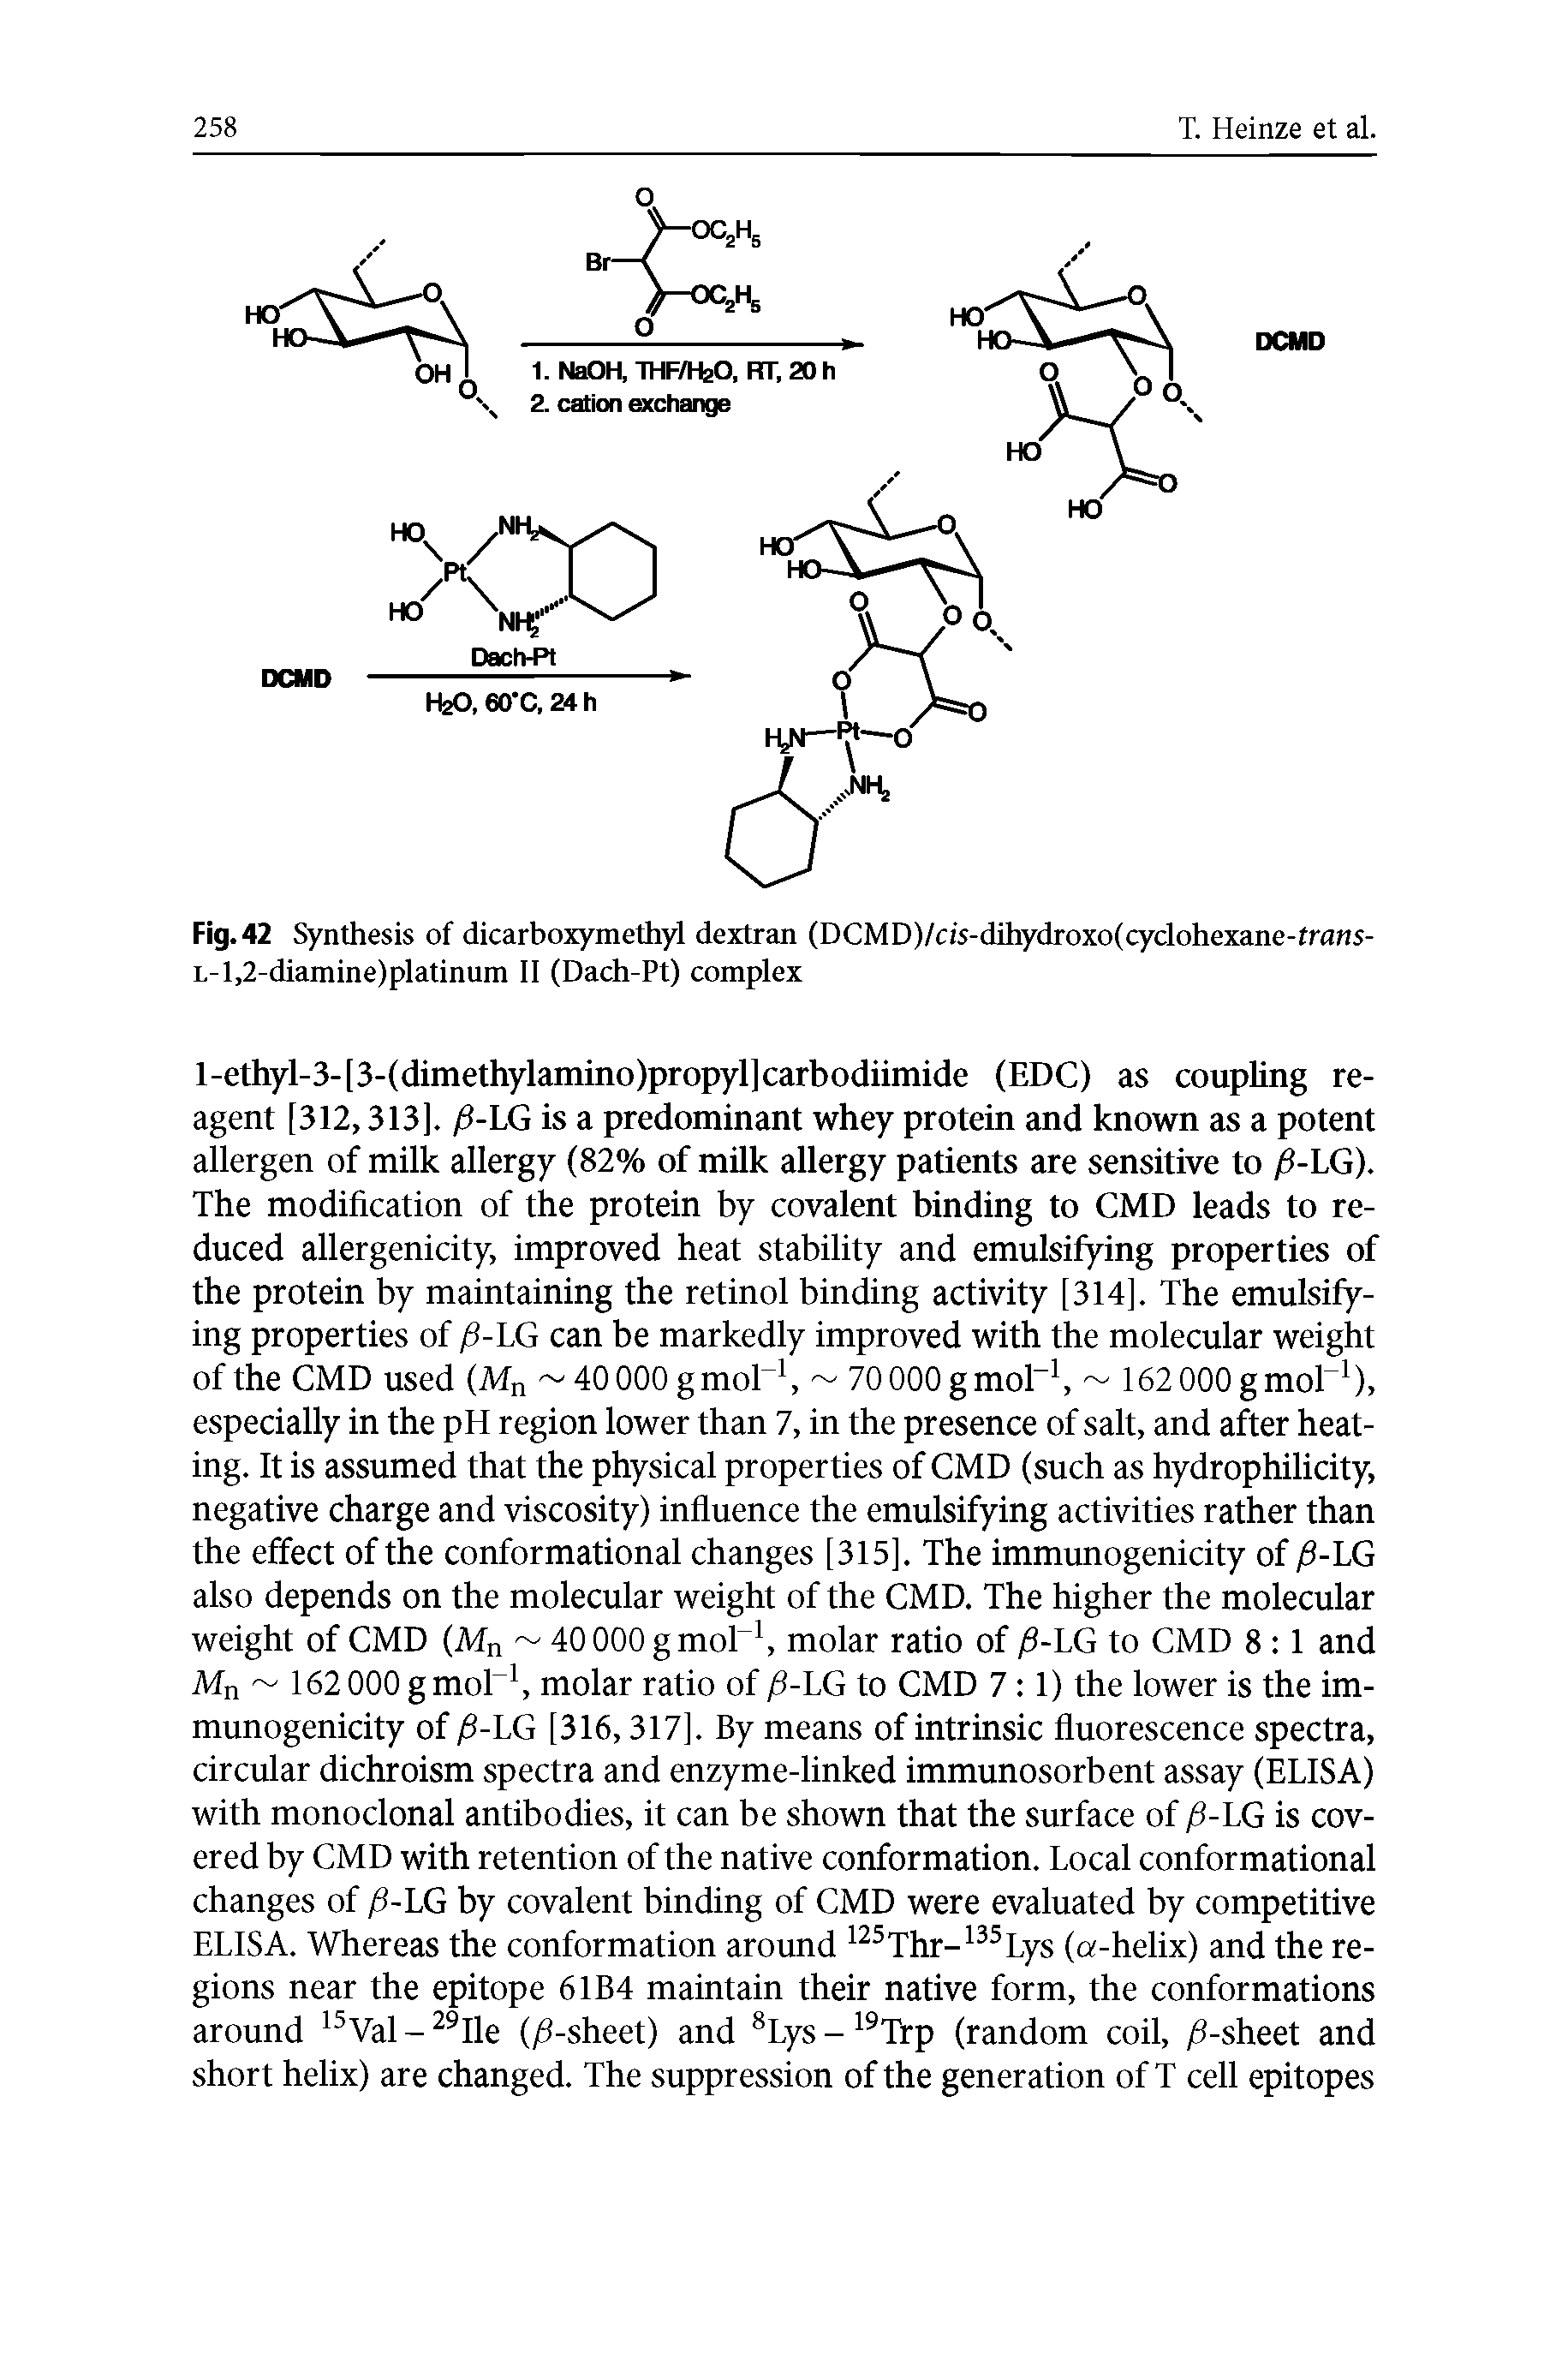 Fig. 42 Synthesis of dicarboxymethyl dextran (DCMD)/ds-dihydroxo(cyclohcxanc-frans-L-l,2-diamine)platinum II (Dach-Pt) complex...